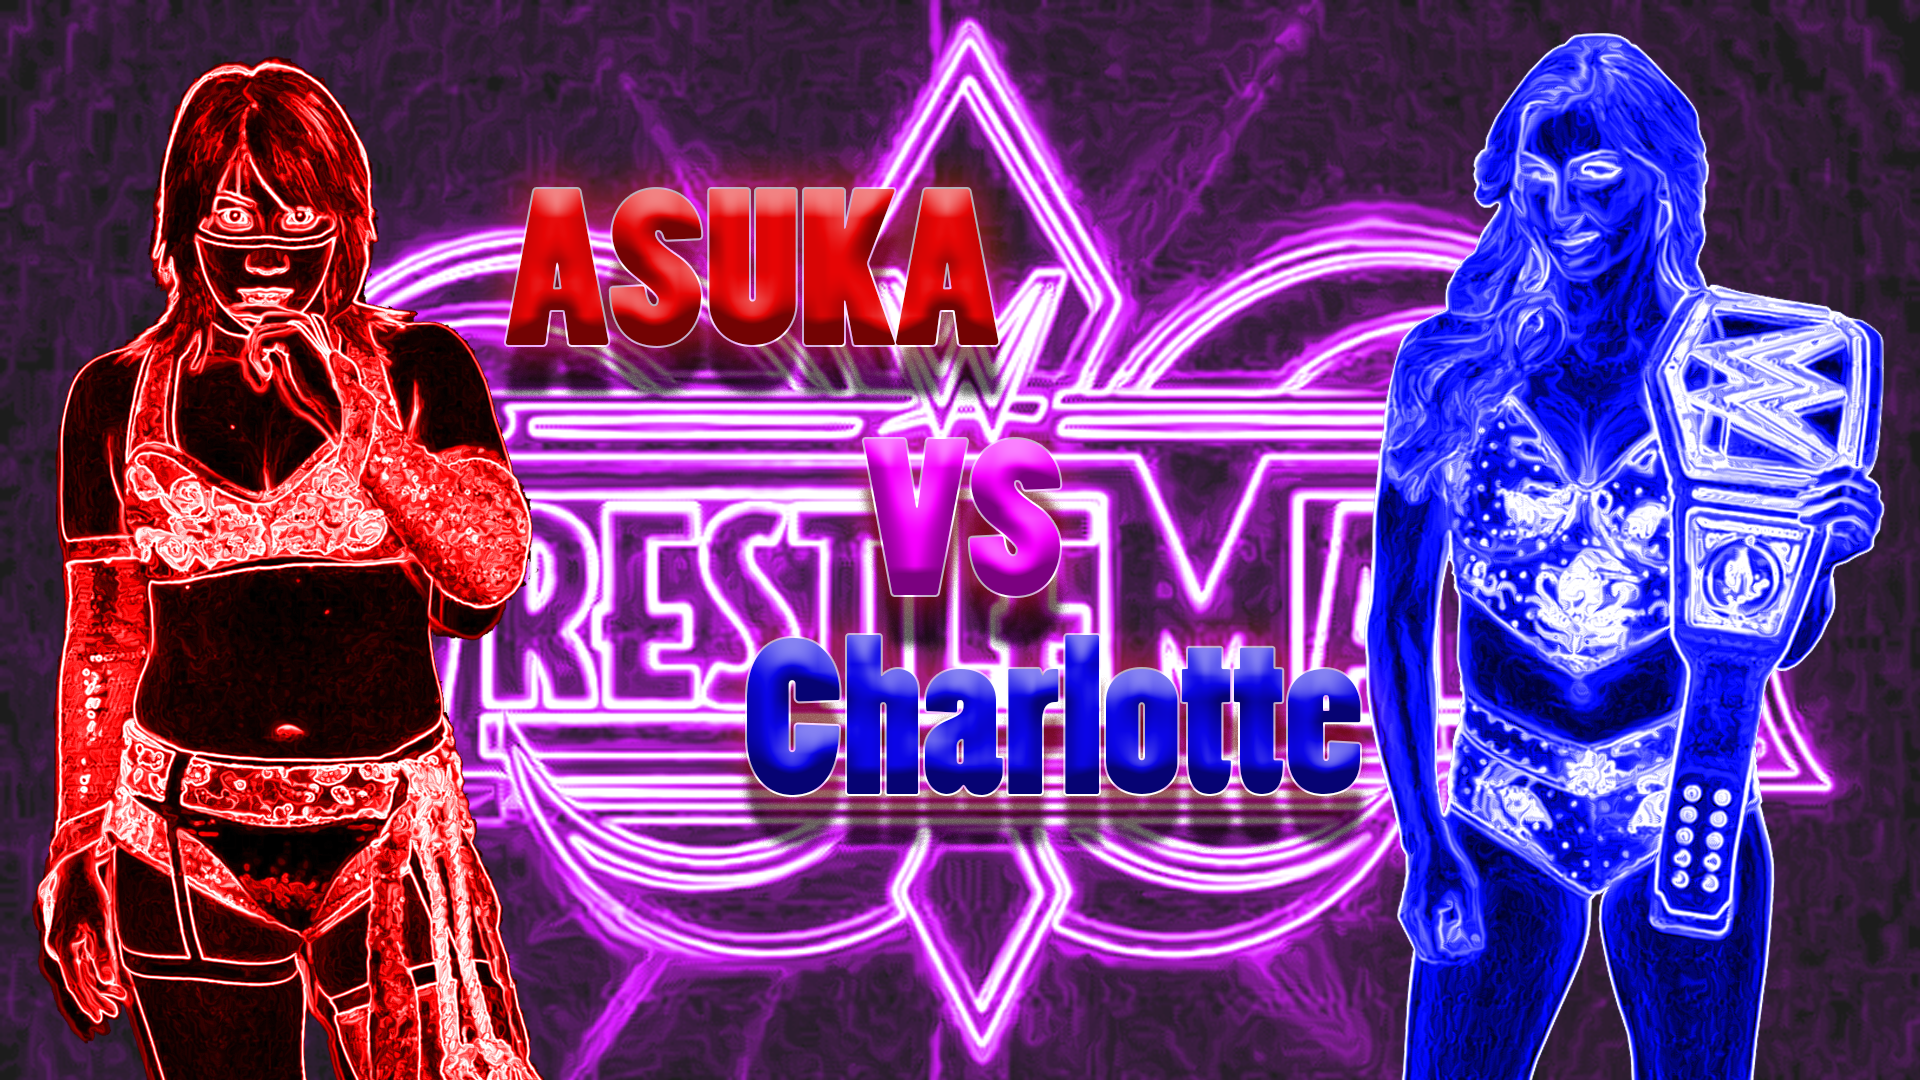 Just messing around with photohop and decided to make a wallpaper for the Wrestlemania match I'm most excited for. Asuka vs Charlotte